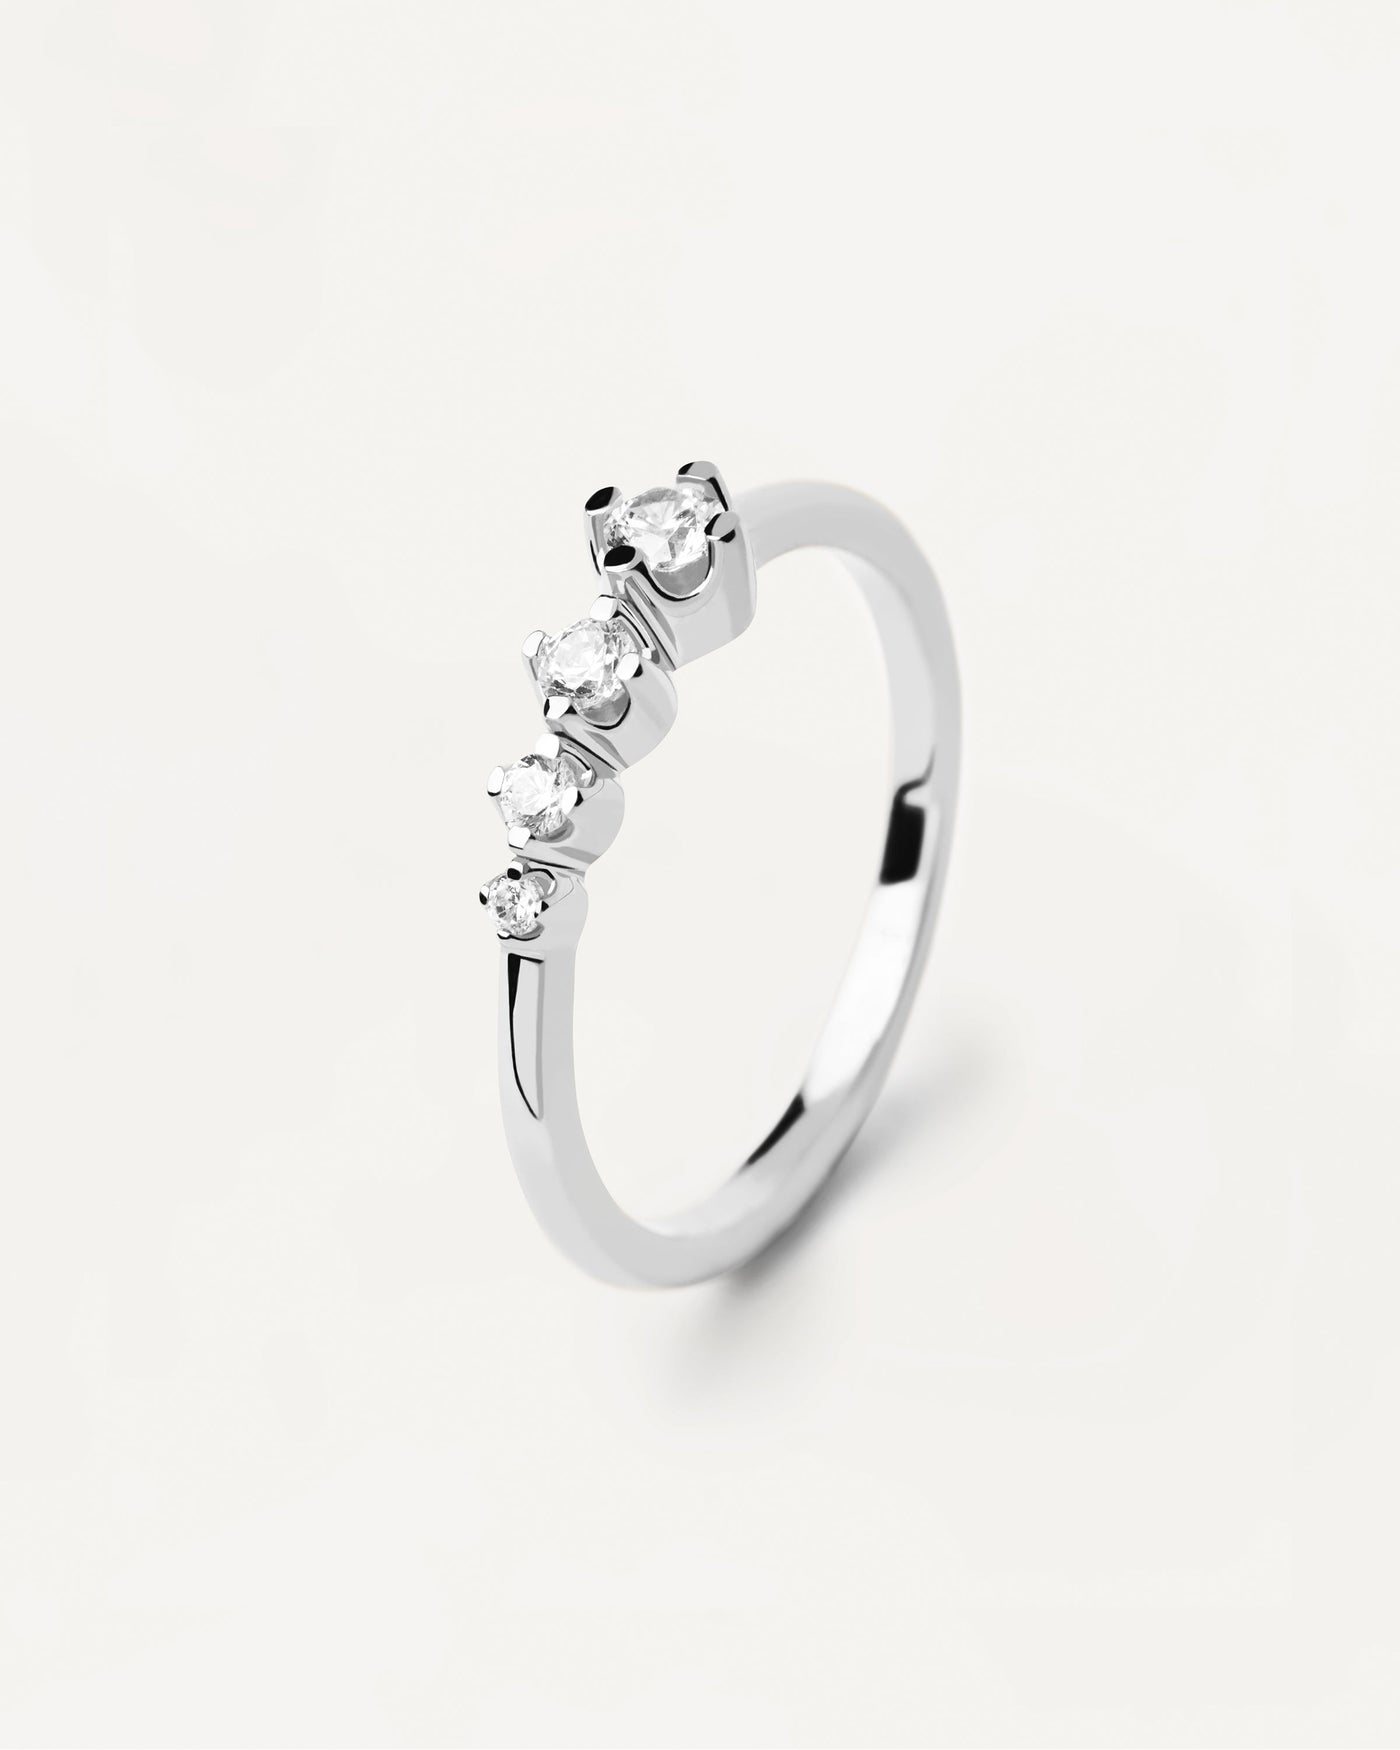 2023 Selection | Spark Silver Ring. 4 shiny white zirconia ring in sterling silver. Get the latest arrival from PDPAOLA. Place your order safely and get this Best Seller. Free Shipping.